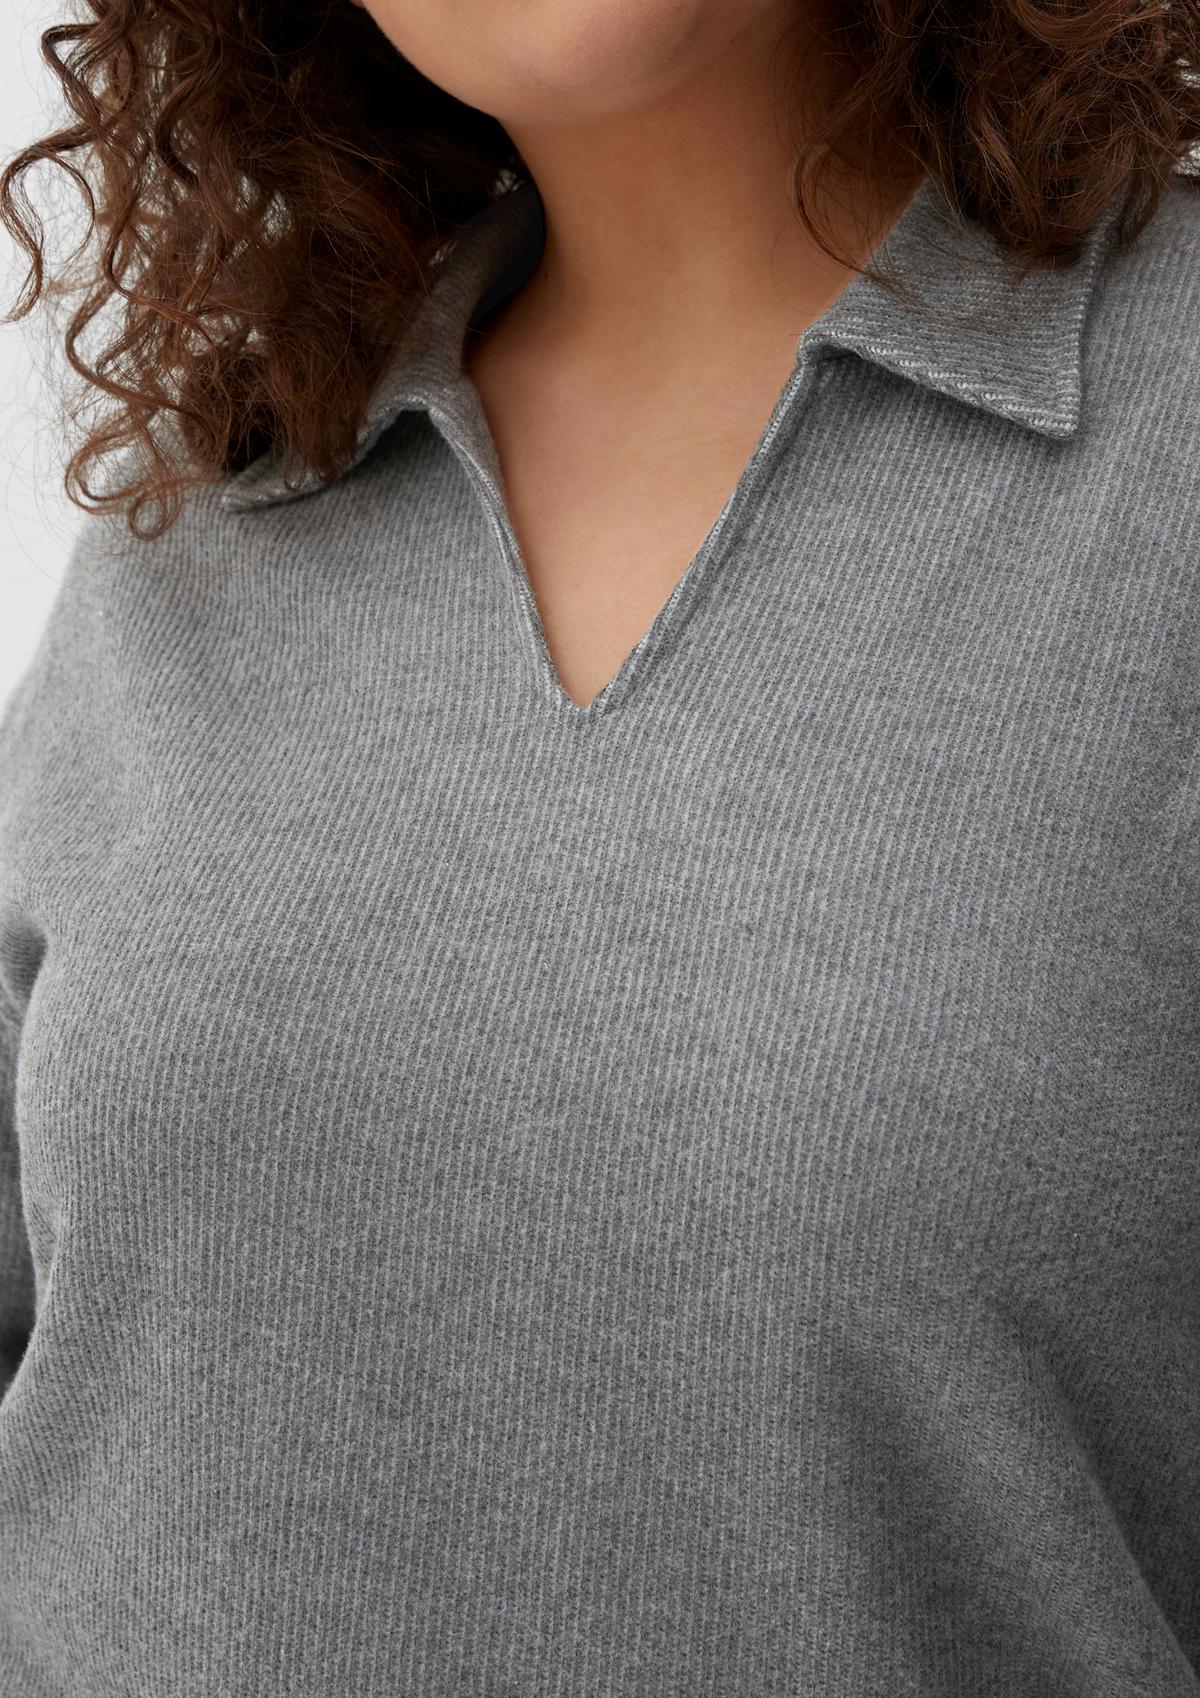 s.Oliver Sweatshirt with a polo collar